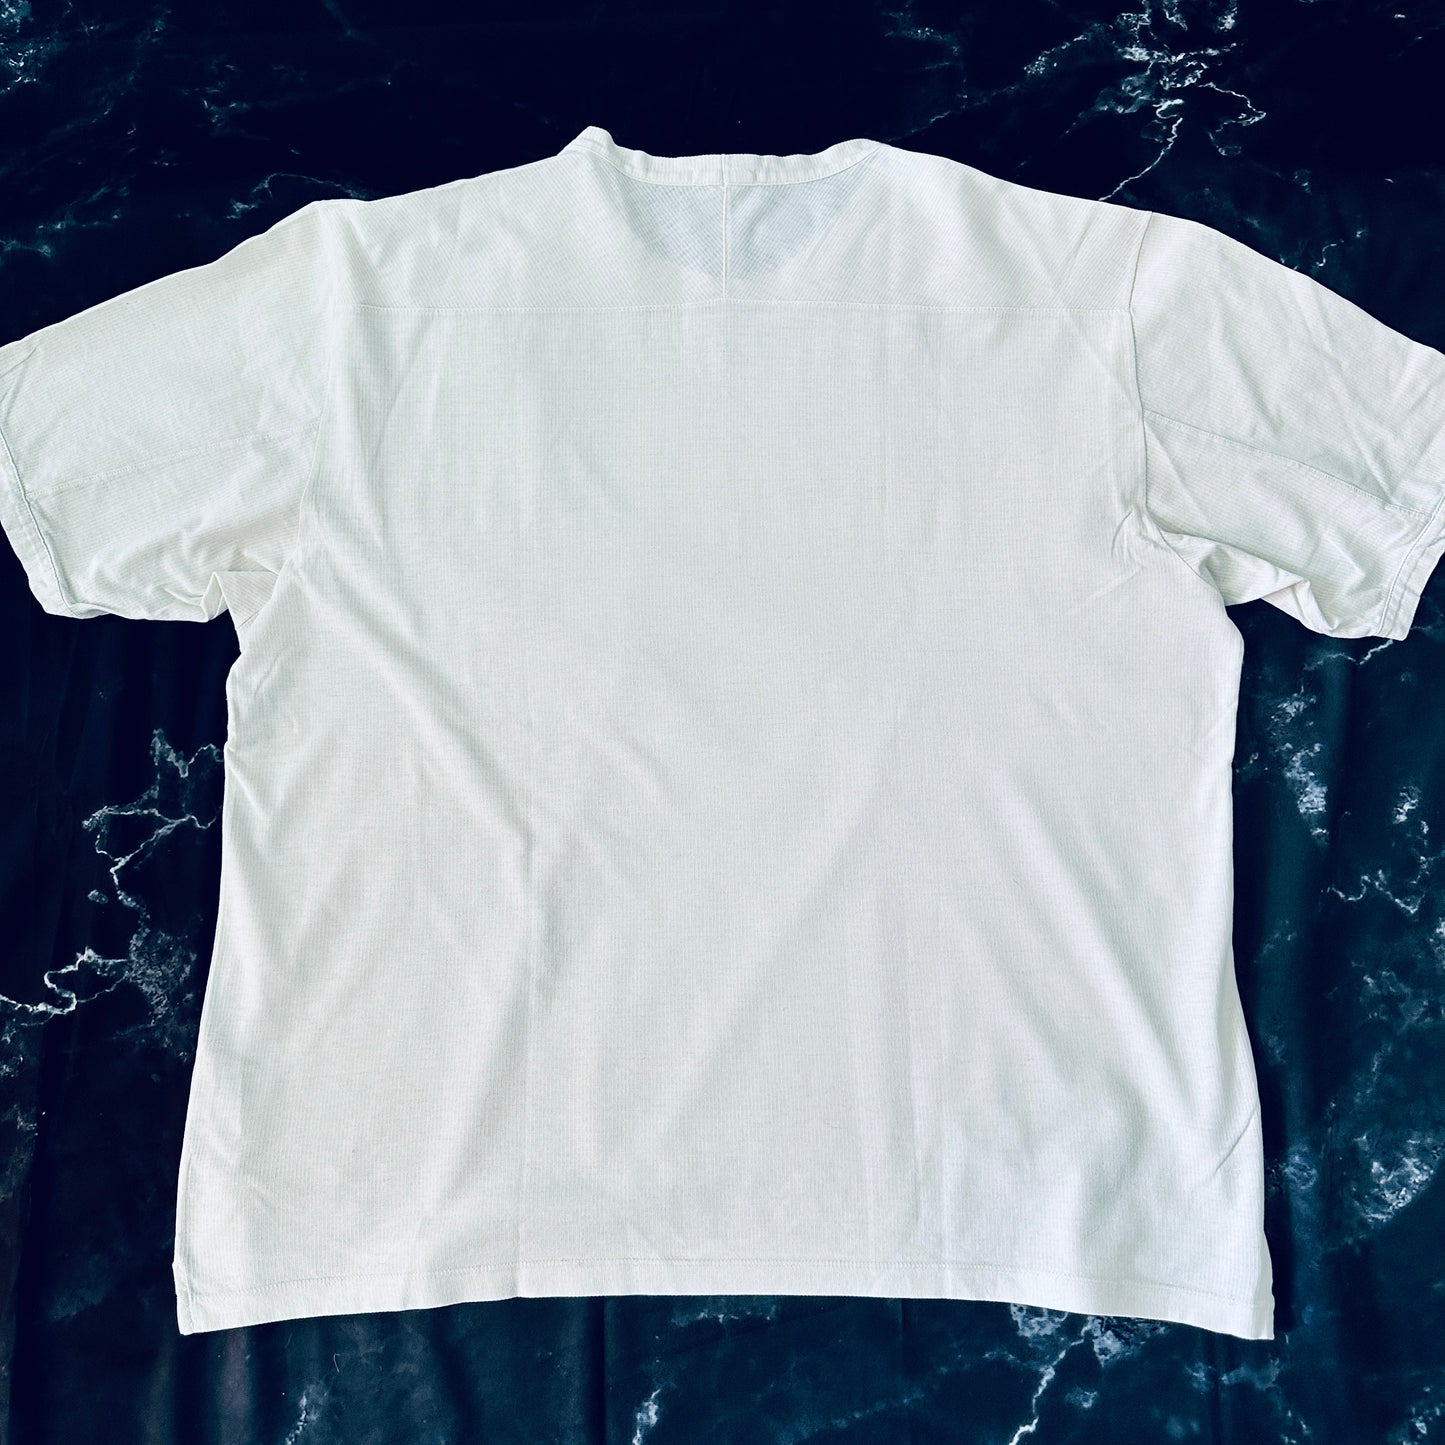 Stone Island T-Shirt 2002 - XXL - Made in Italy